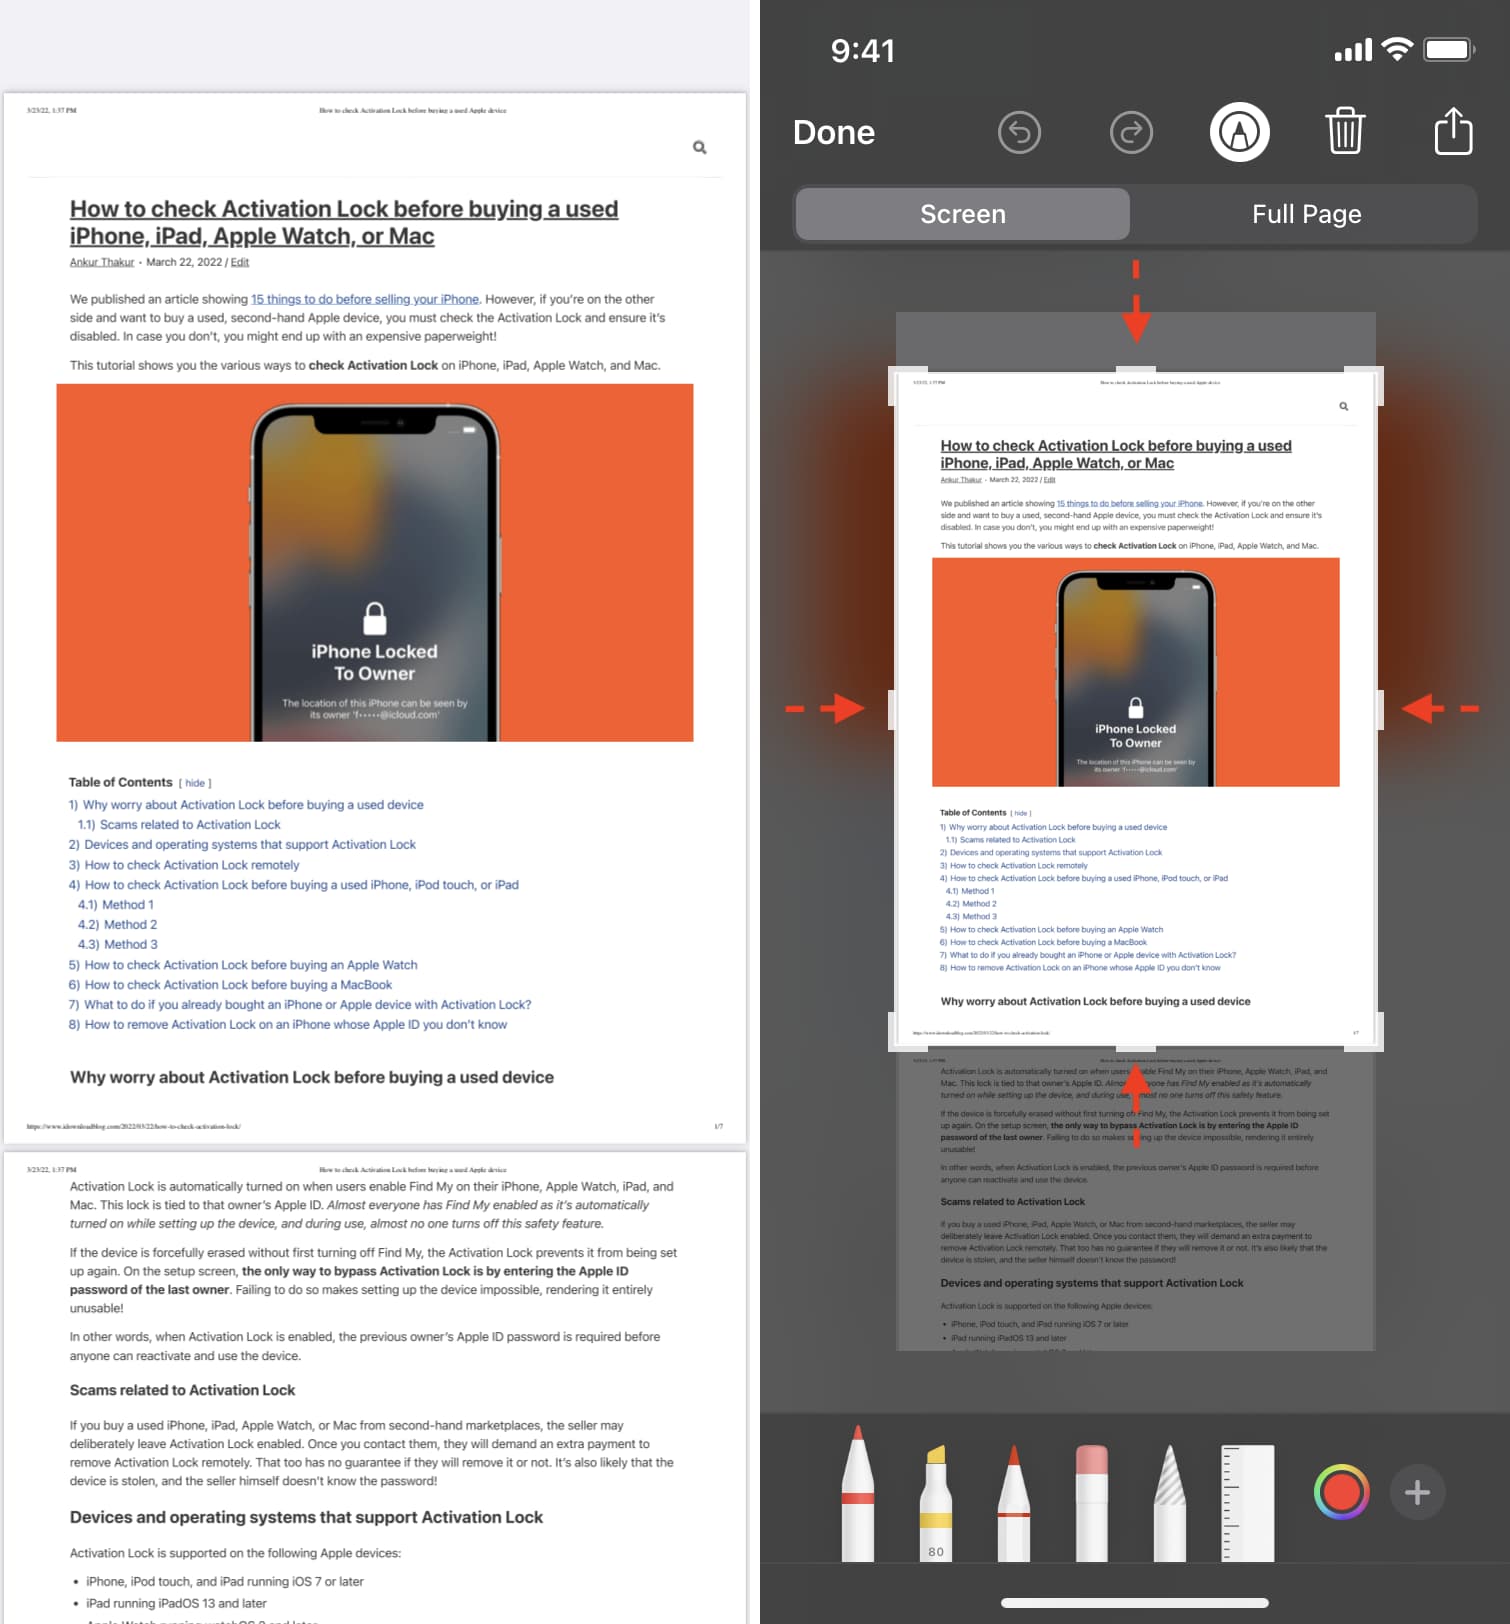 Take screenshot of a PDF and save it as image on iPhone